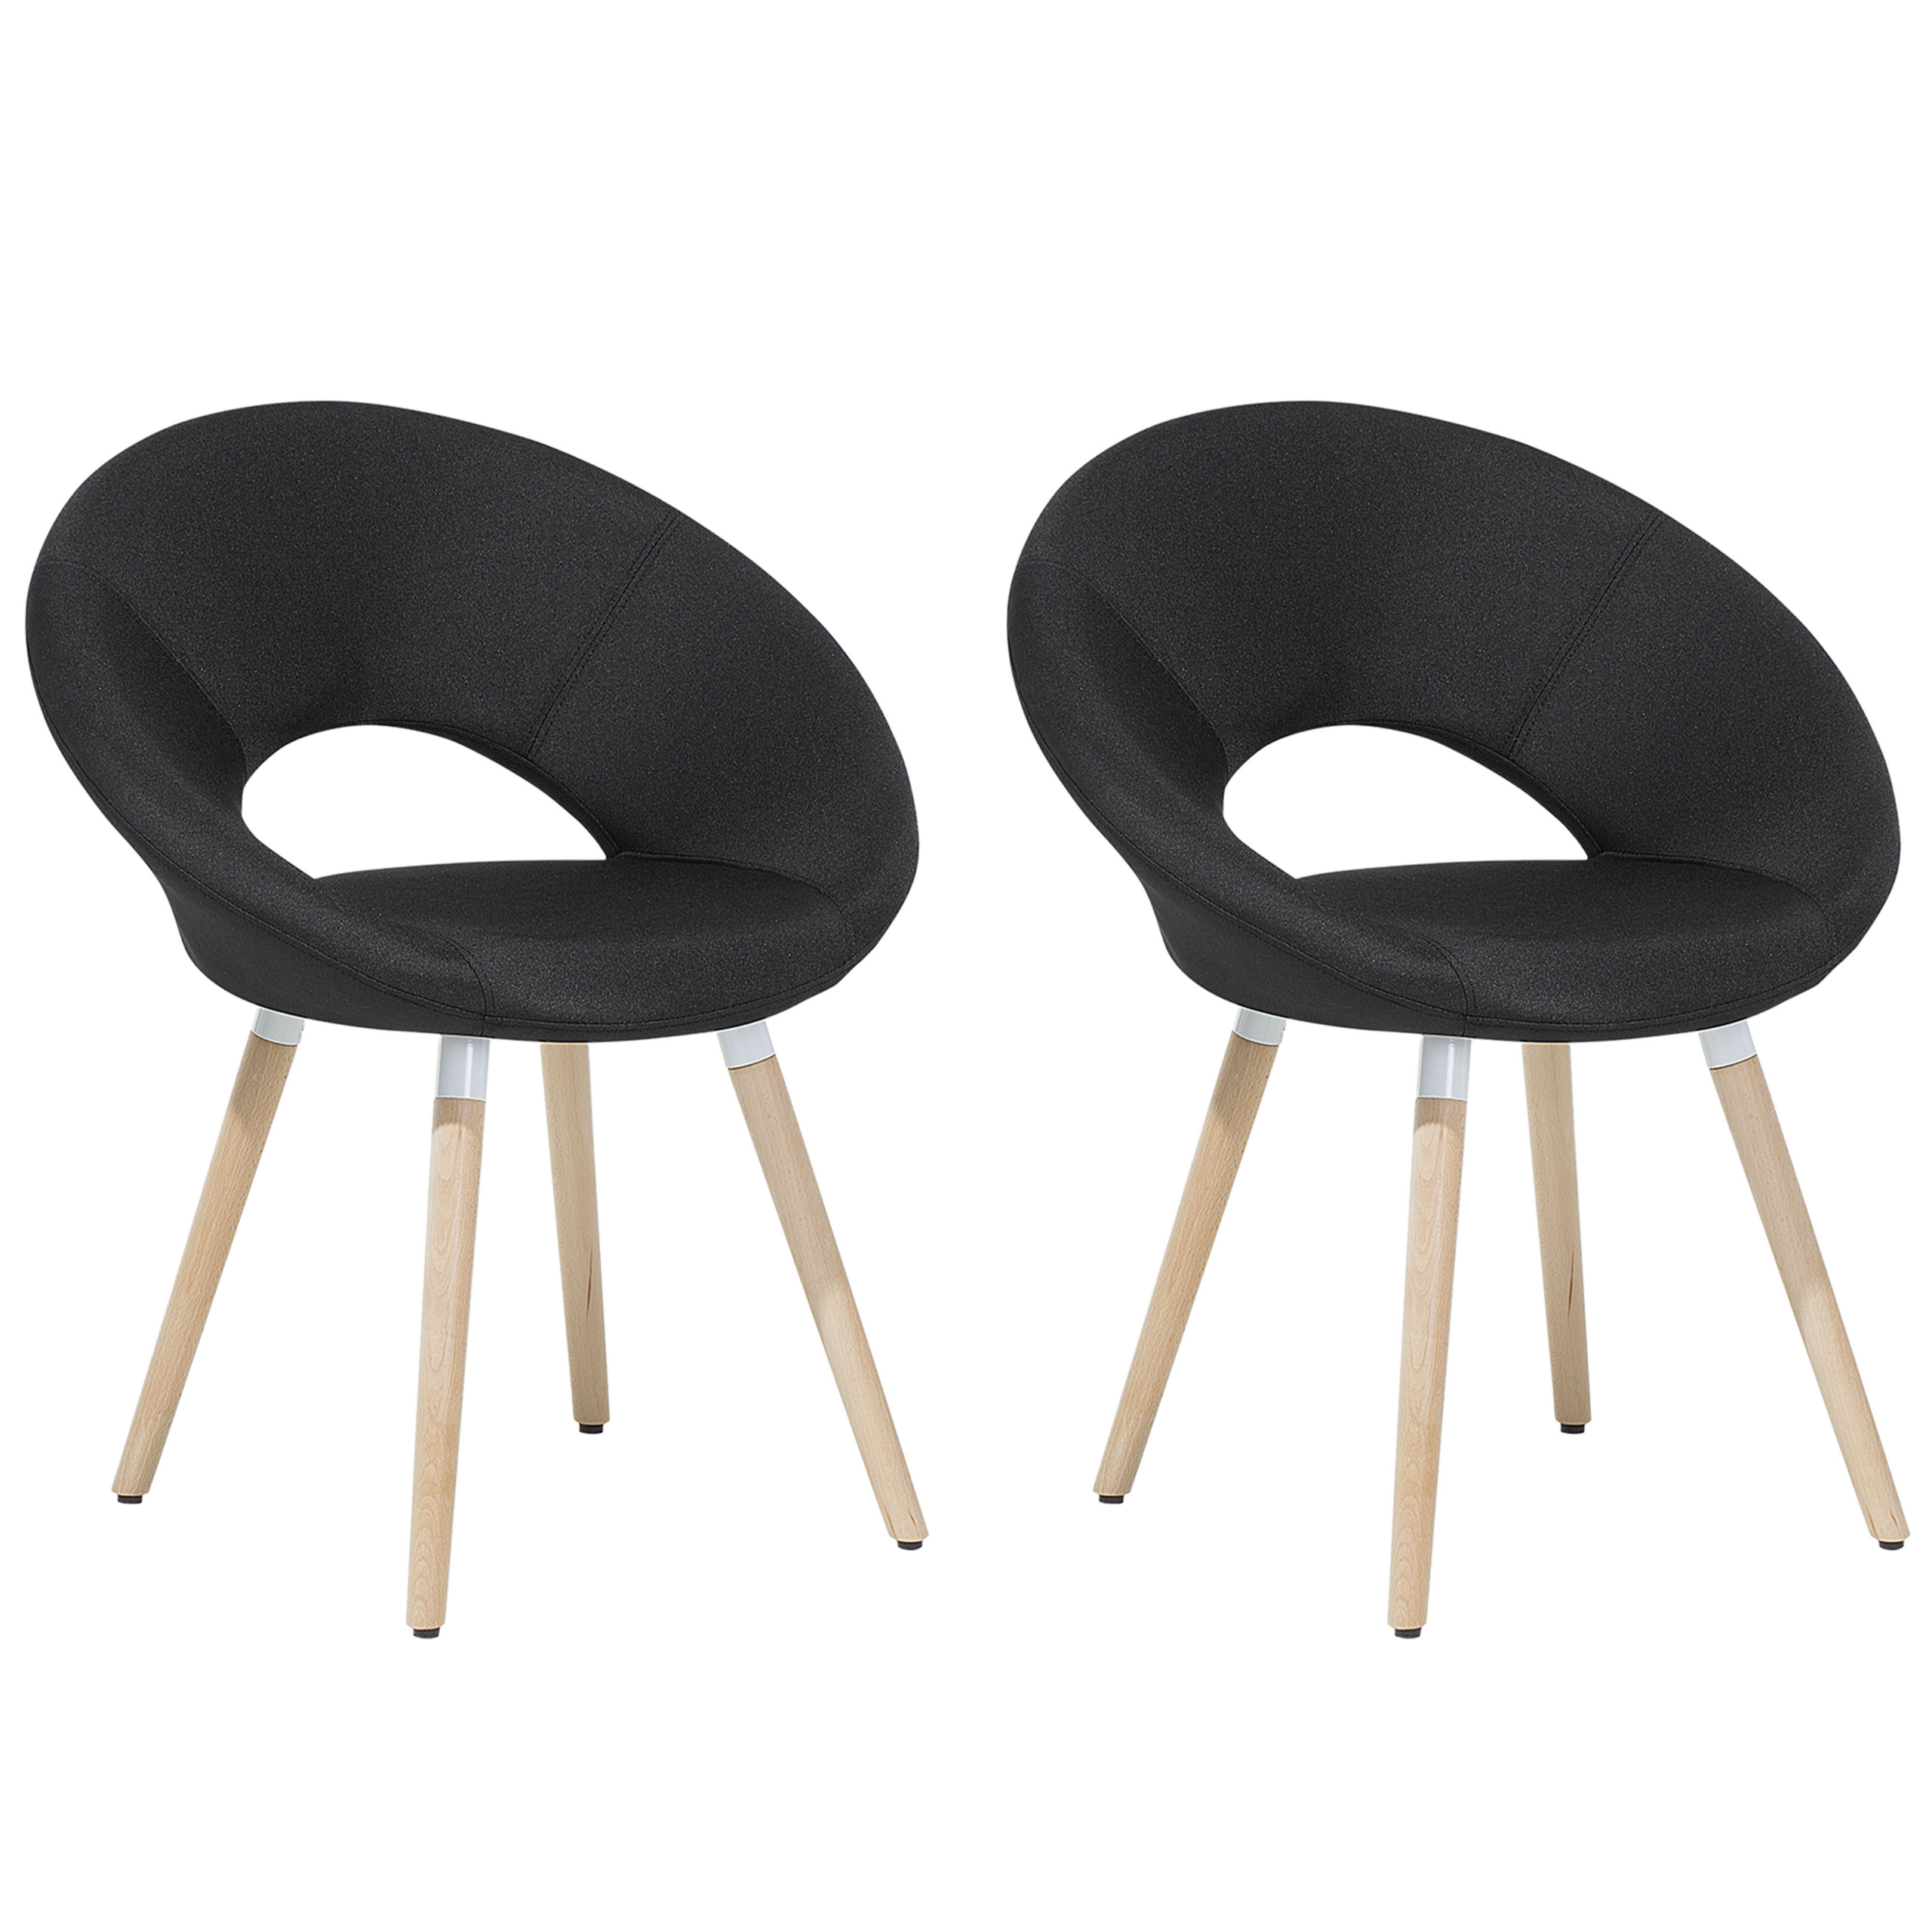 Beliani Set of 2 Dining Chairs Black Fabric Upholstery Light Wood Legs Modern Eclectic Style